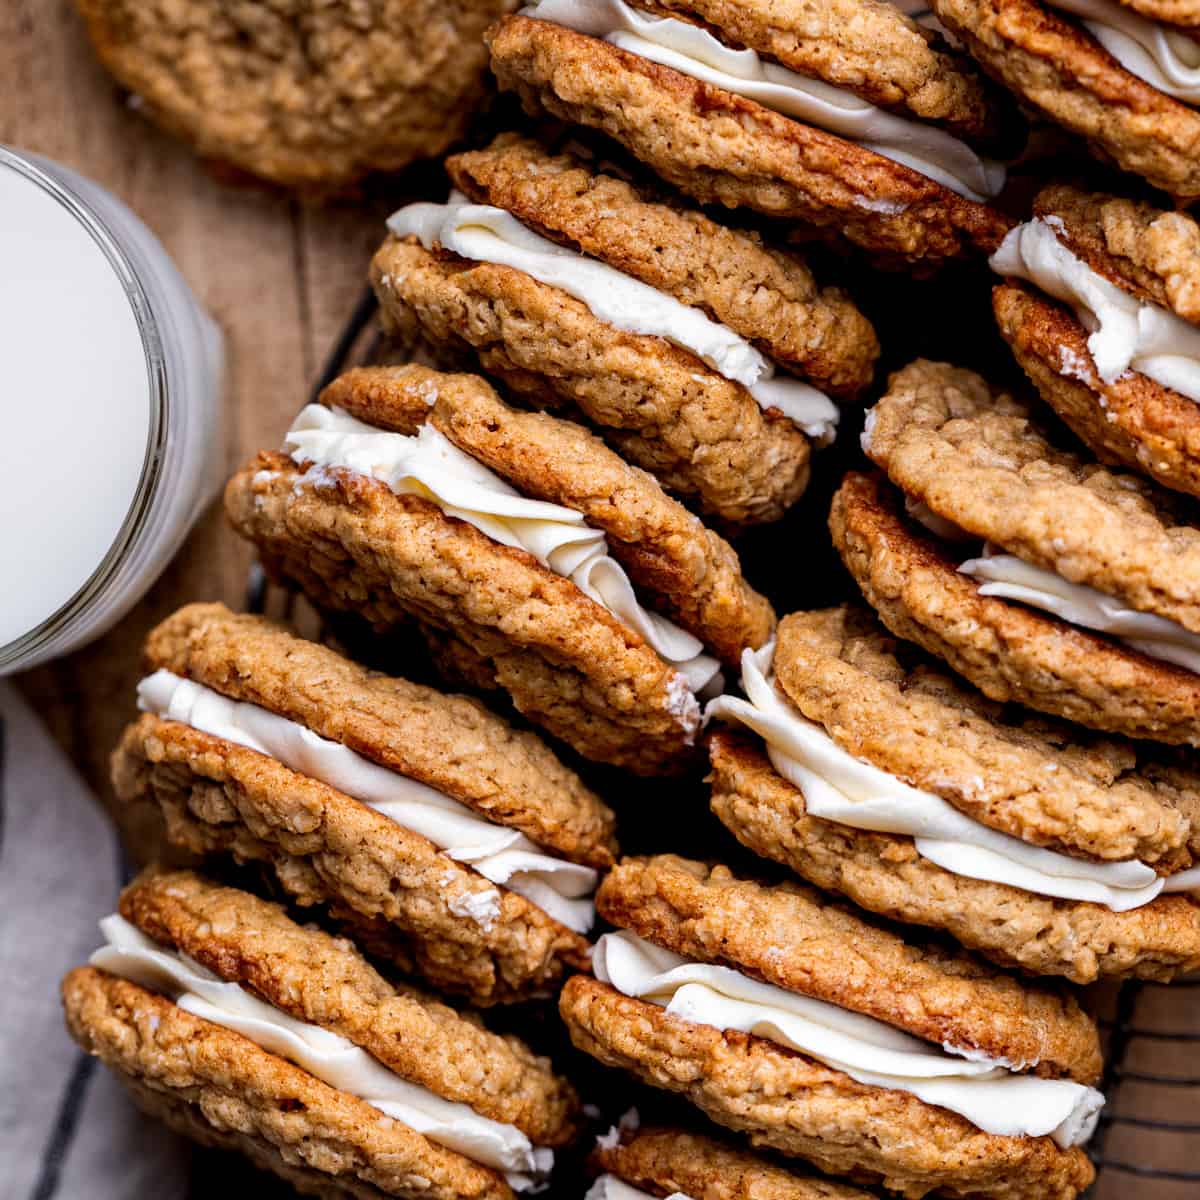 Oatmeal cream pies on its side on a wire rack.